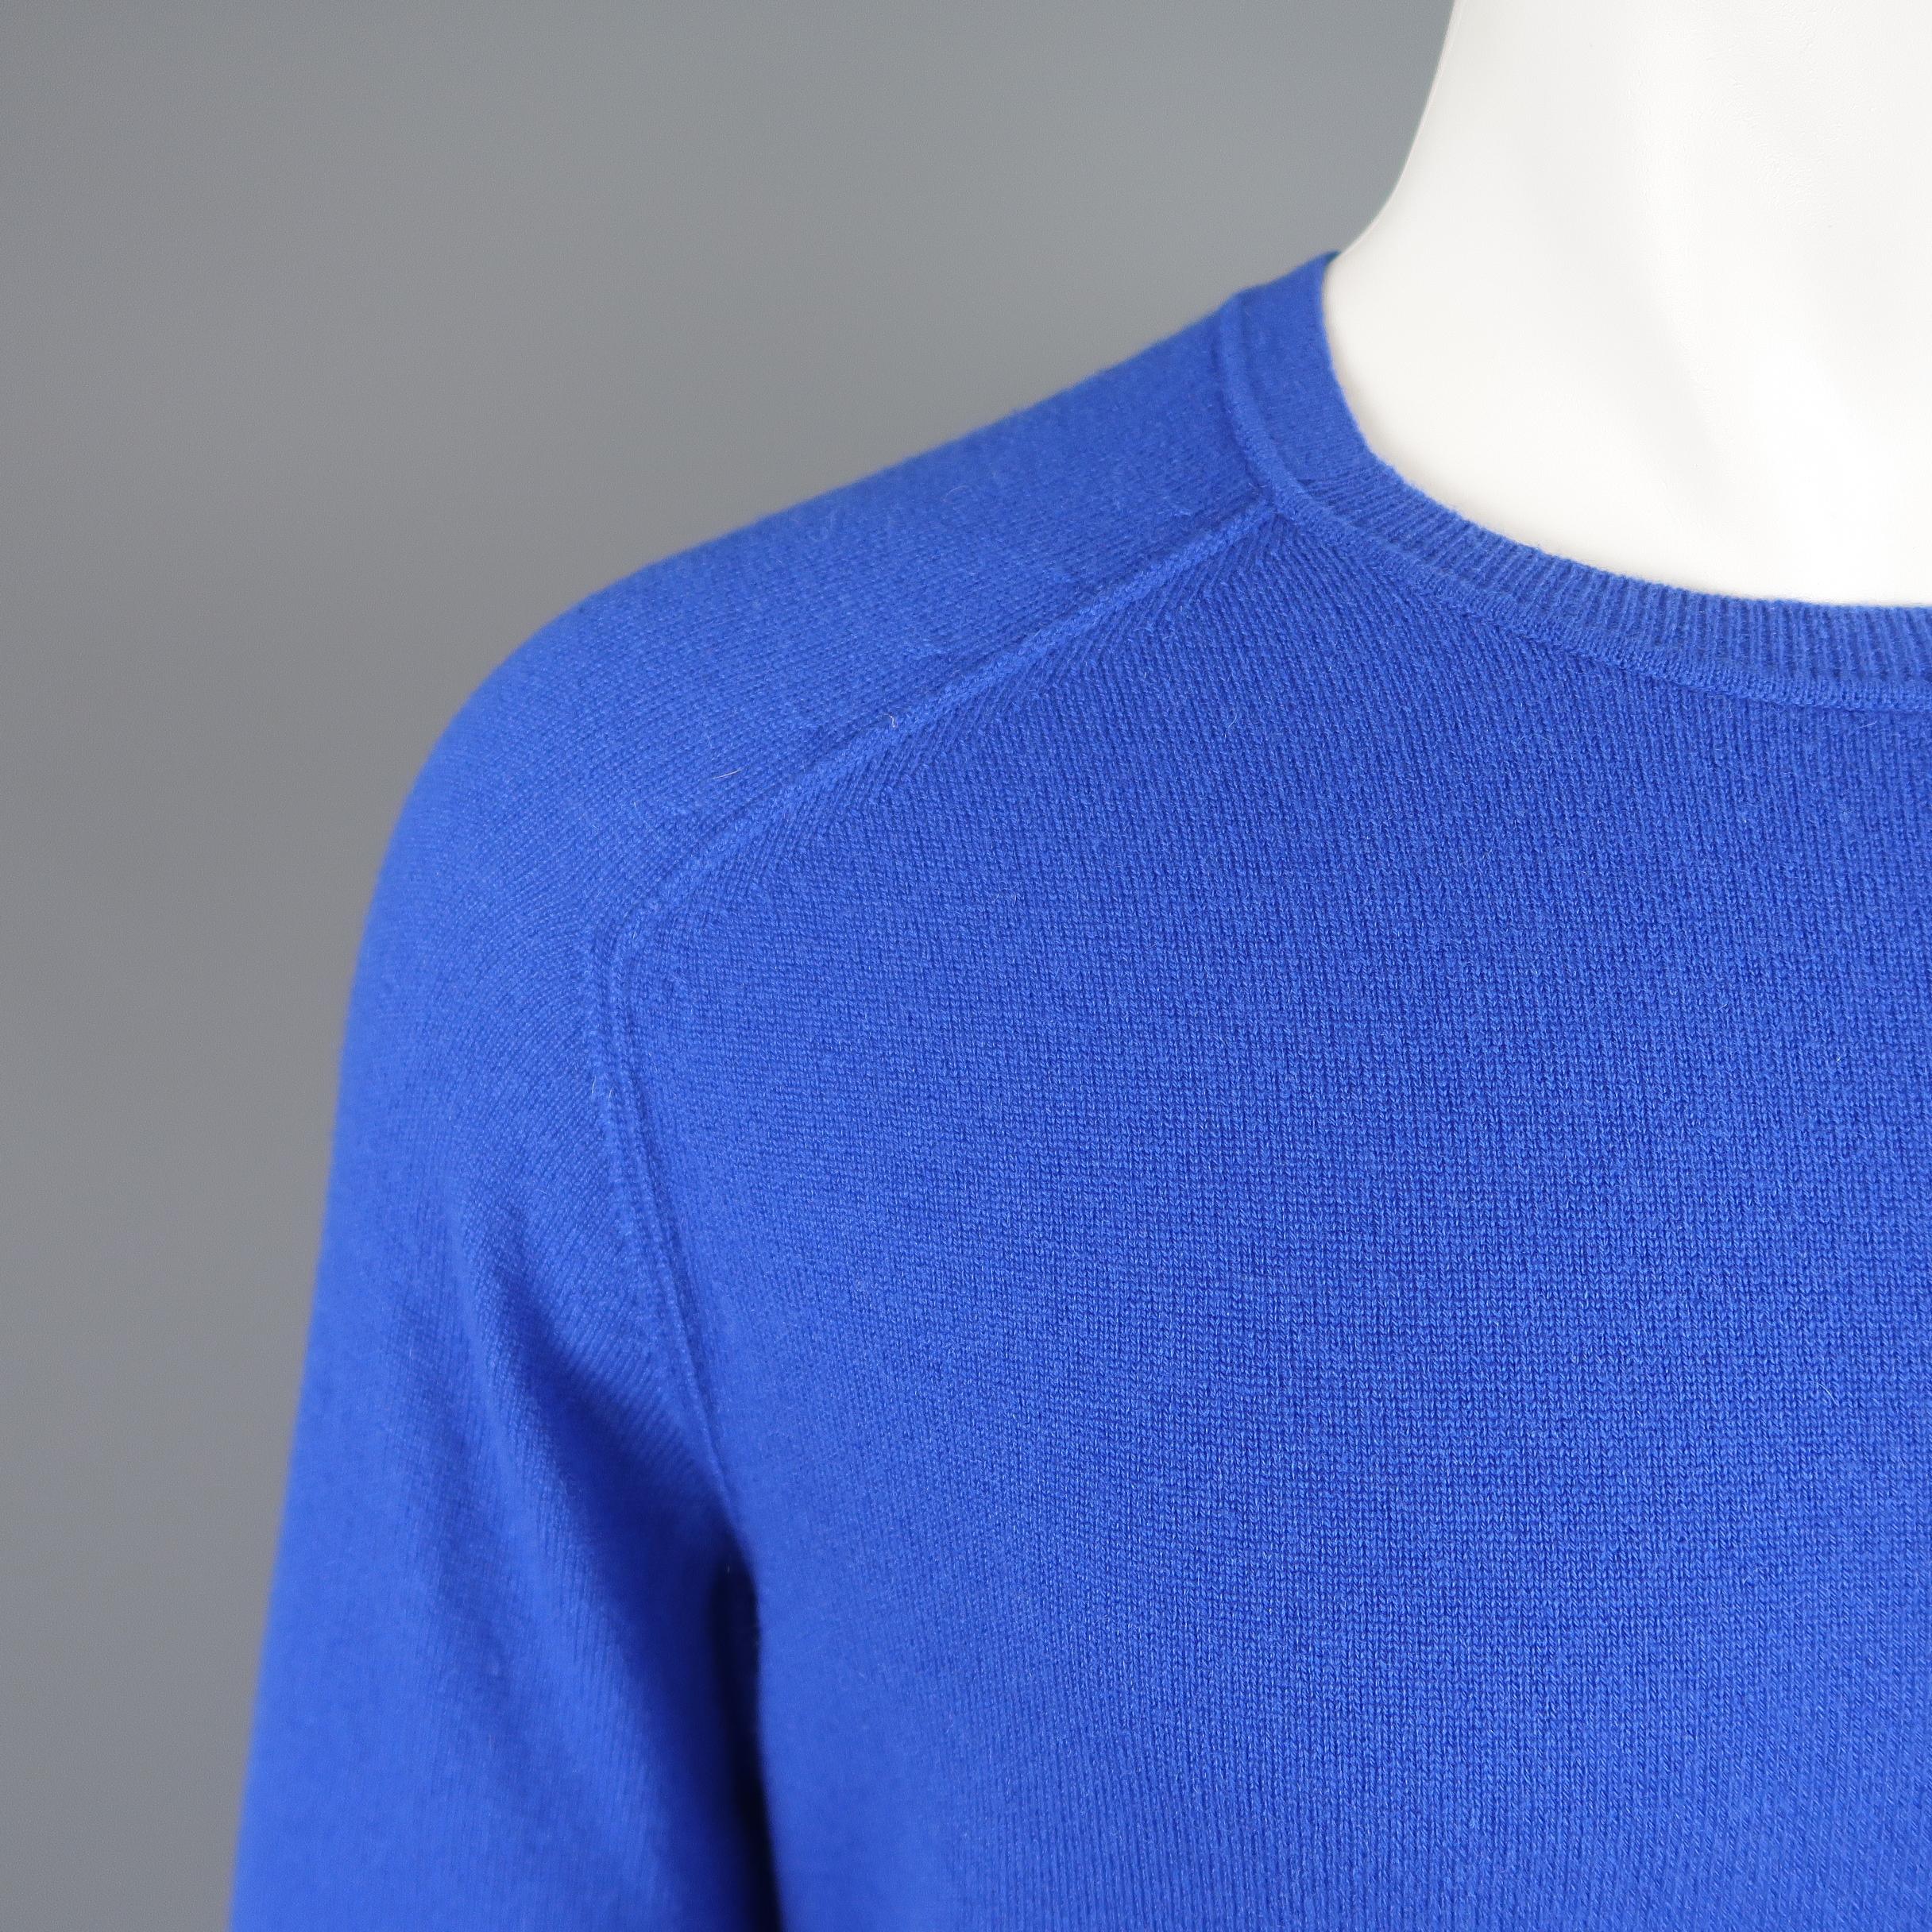 LORO PIANA pullover sweater comes in royal blue cashmere knit with a crewneck and elbow patches. Made in Italy.
 
Excellent Pre-Owned Condition.
Marked: IT 50
 
Measurements:
 
Shoulder: 17 in.
Chest: 42 in.
Sleeve: 29 in.
Length: 26 in.